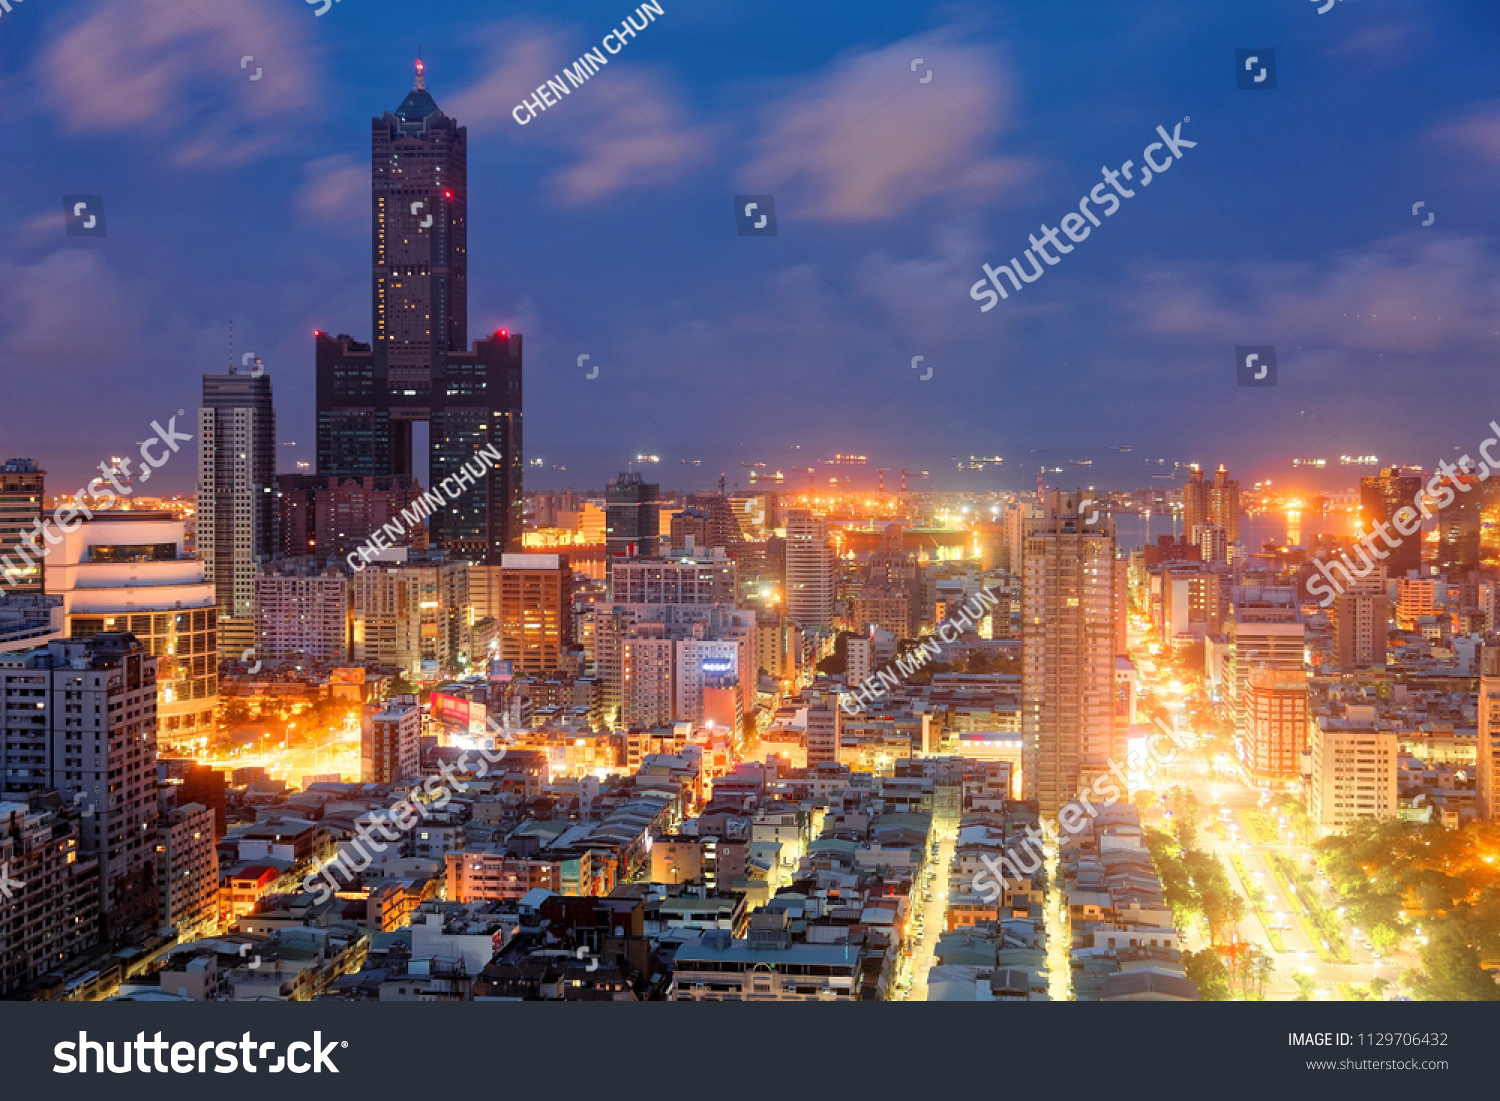 Nightscape of Kaohsiung City, a vibrant seaport in South Taiwan, with the landmark 85 Sky Tower standing among modern buildings, street lights dazzling in blue twilight and ships parking in the harbor #1129706432